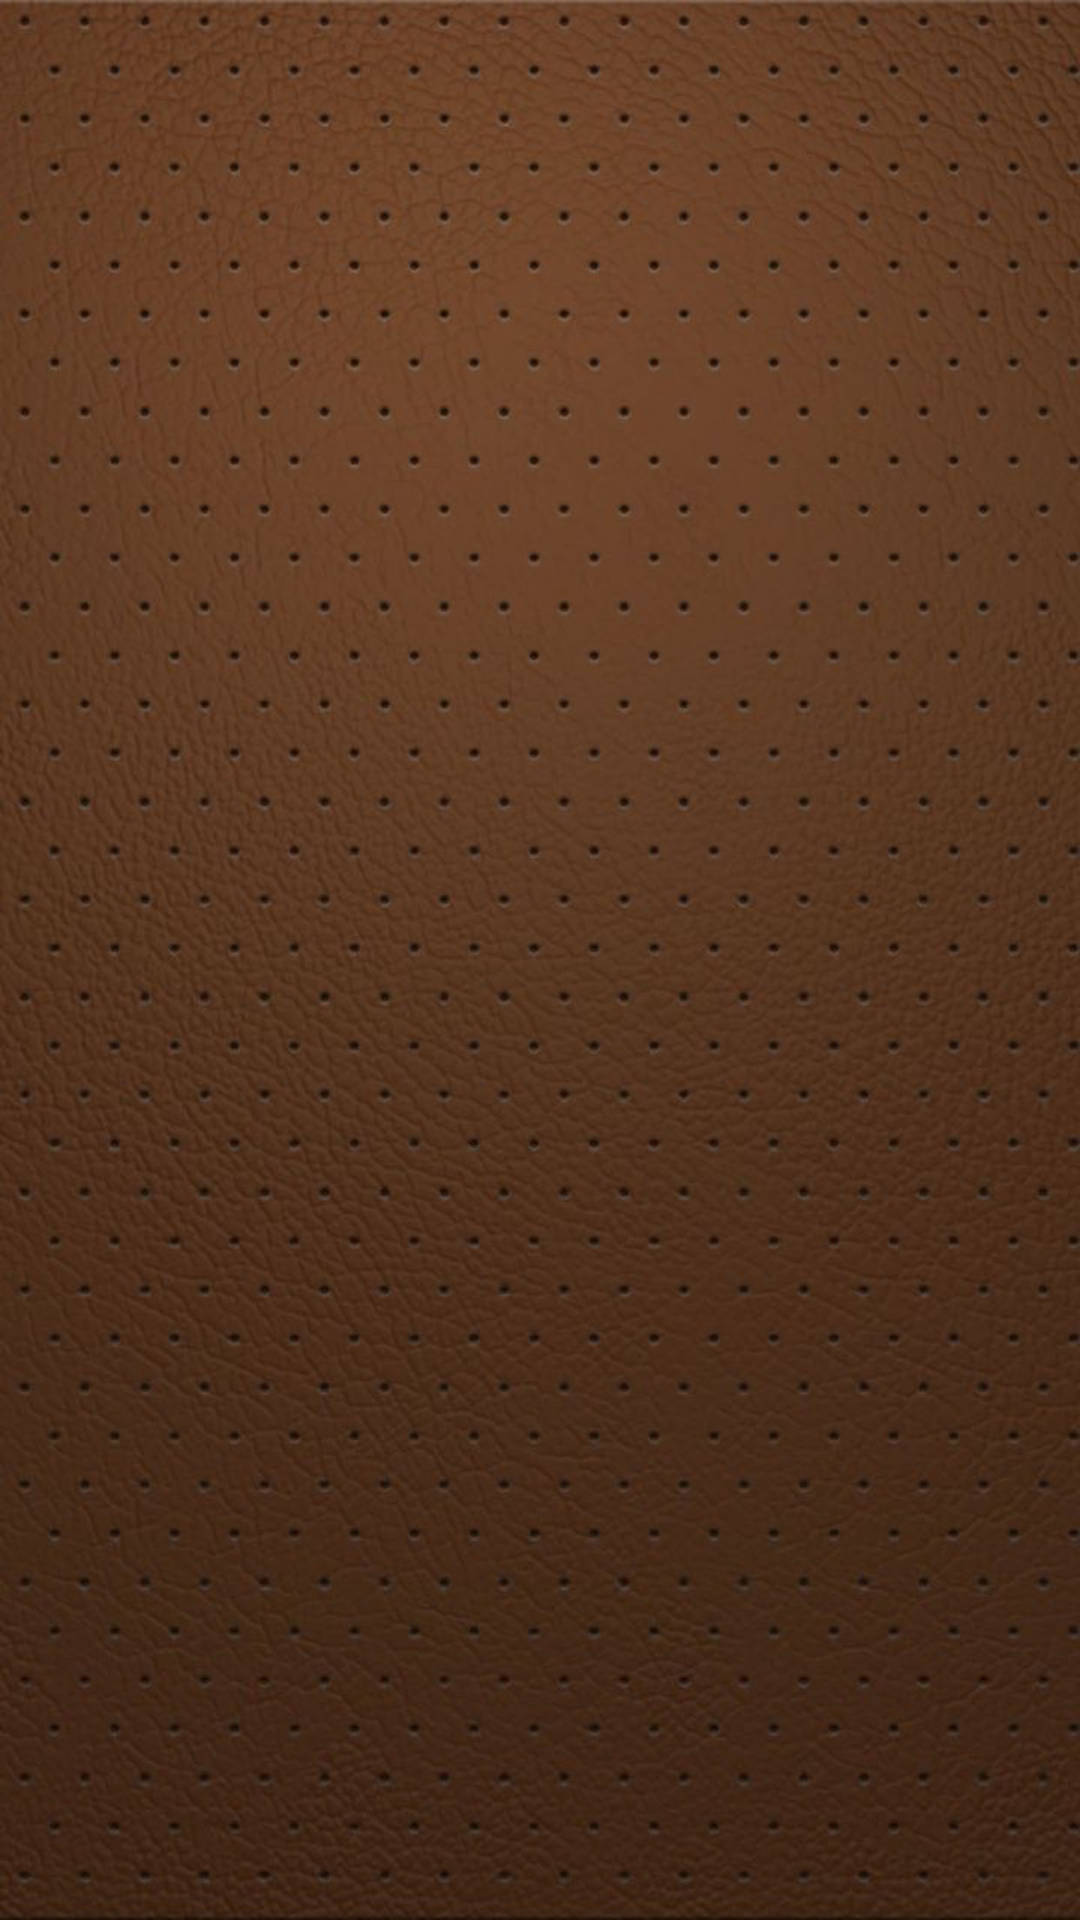 Dotted Brown Iphone Background